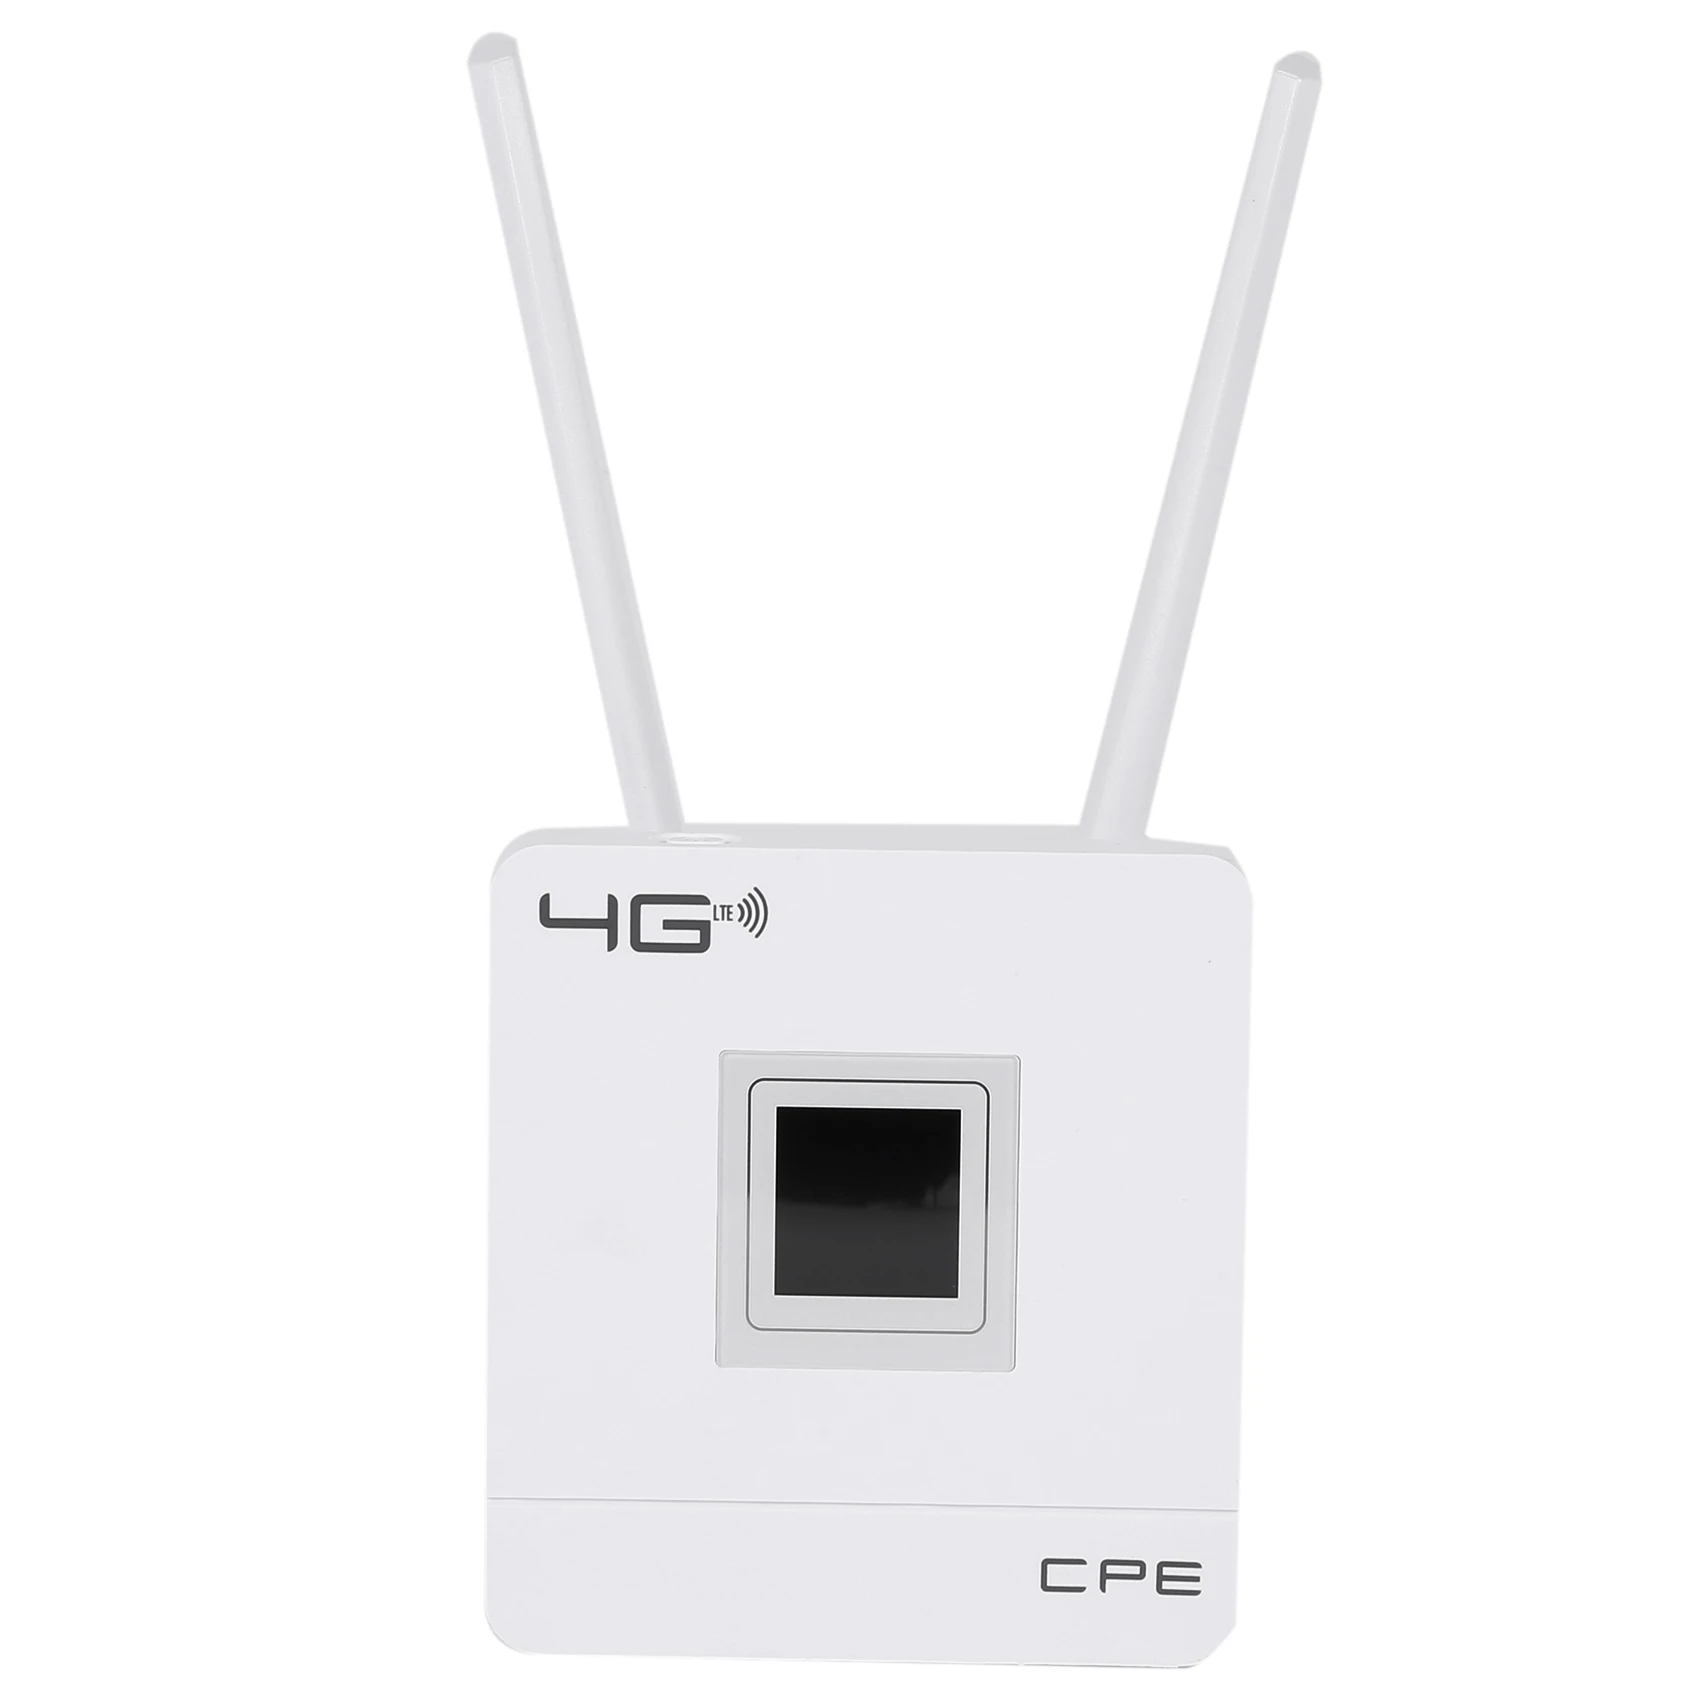 

3G 4G LTE Wifi Router 150Mbps Portable Hotspot Unlocked Wireless CPE Router with Sim Card Slot WAN/LAN Port EU